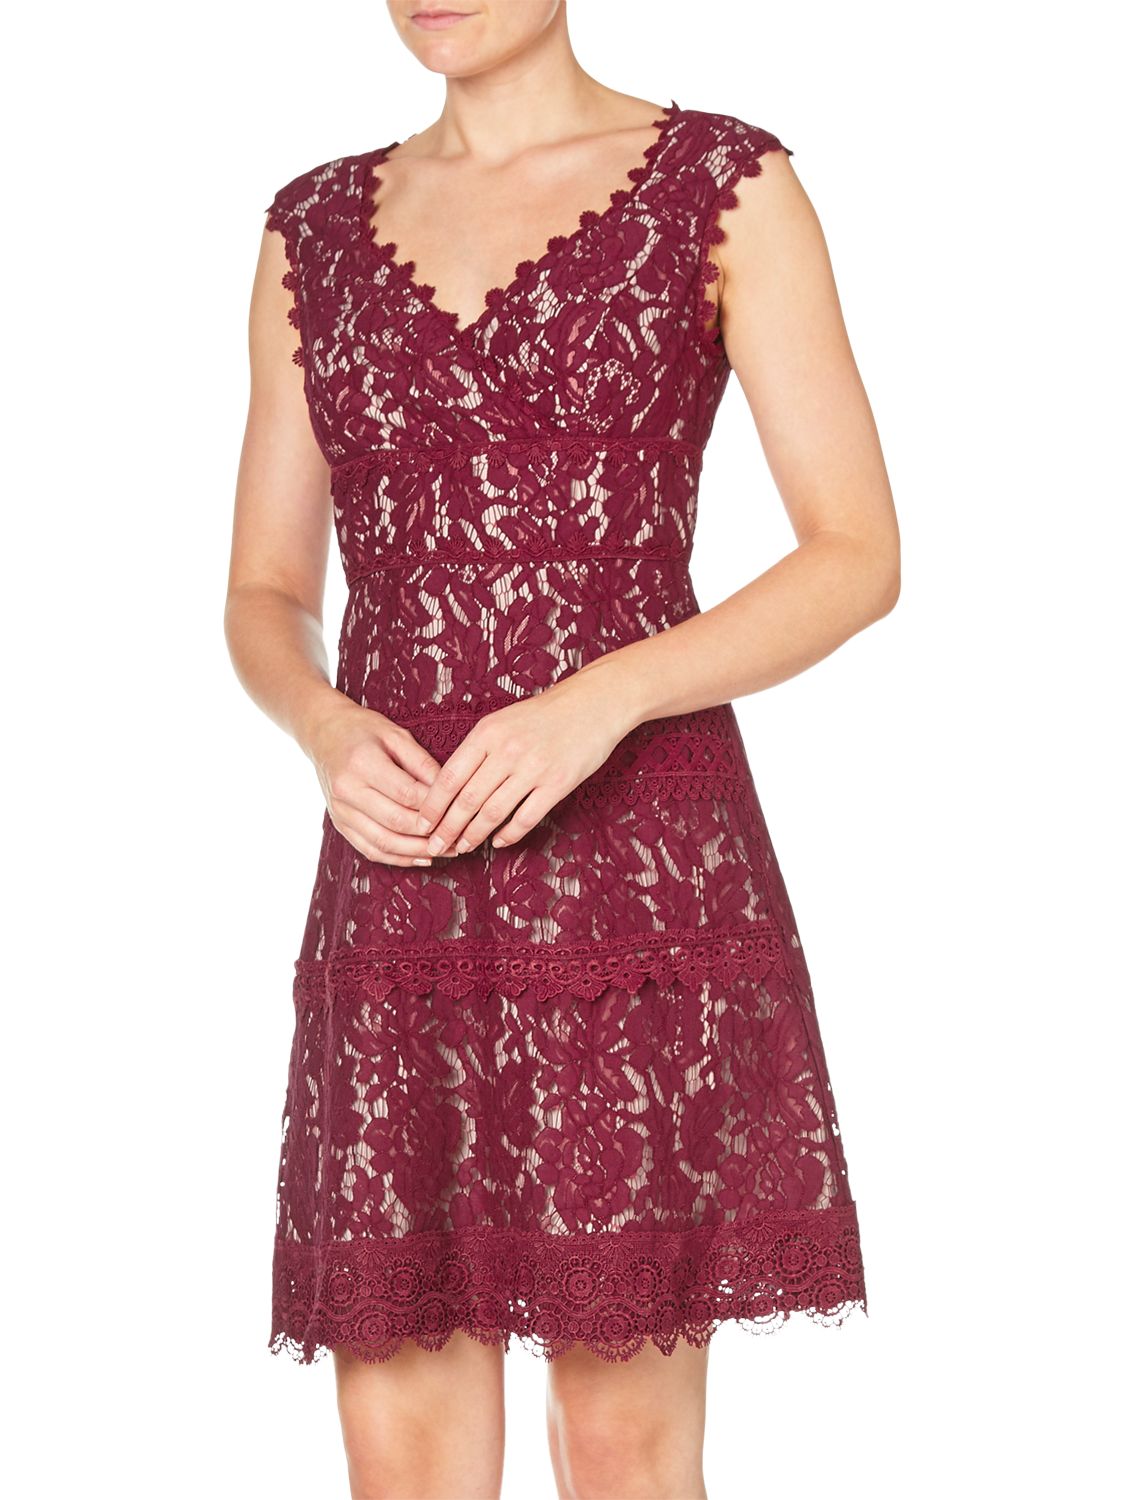 Adrianna Papell Cynthia Lace Fit and Flare Dress, Black Cherry/Blush